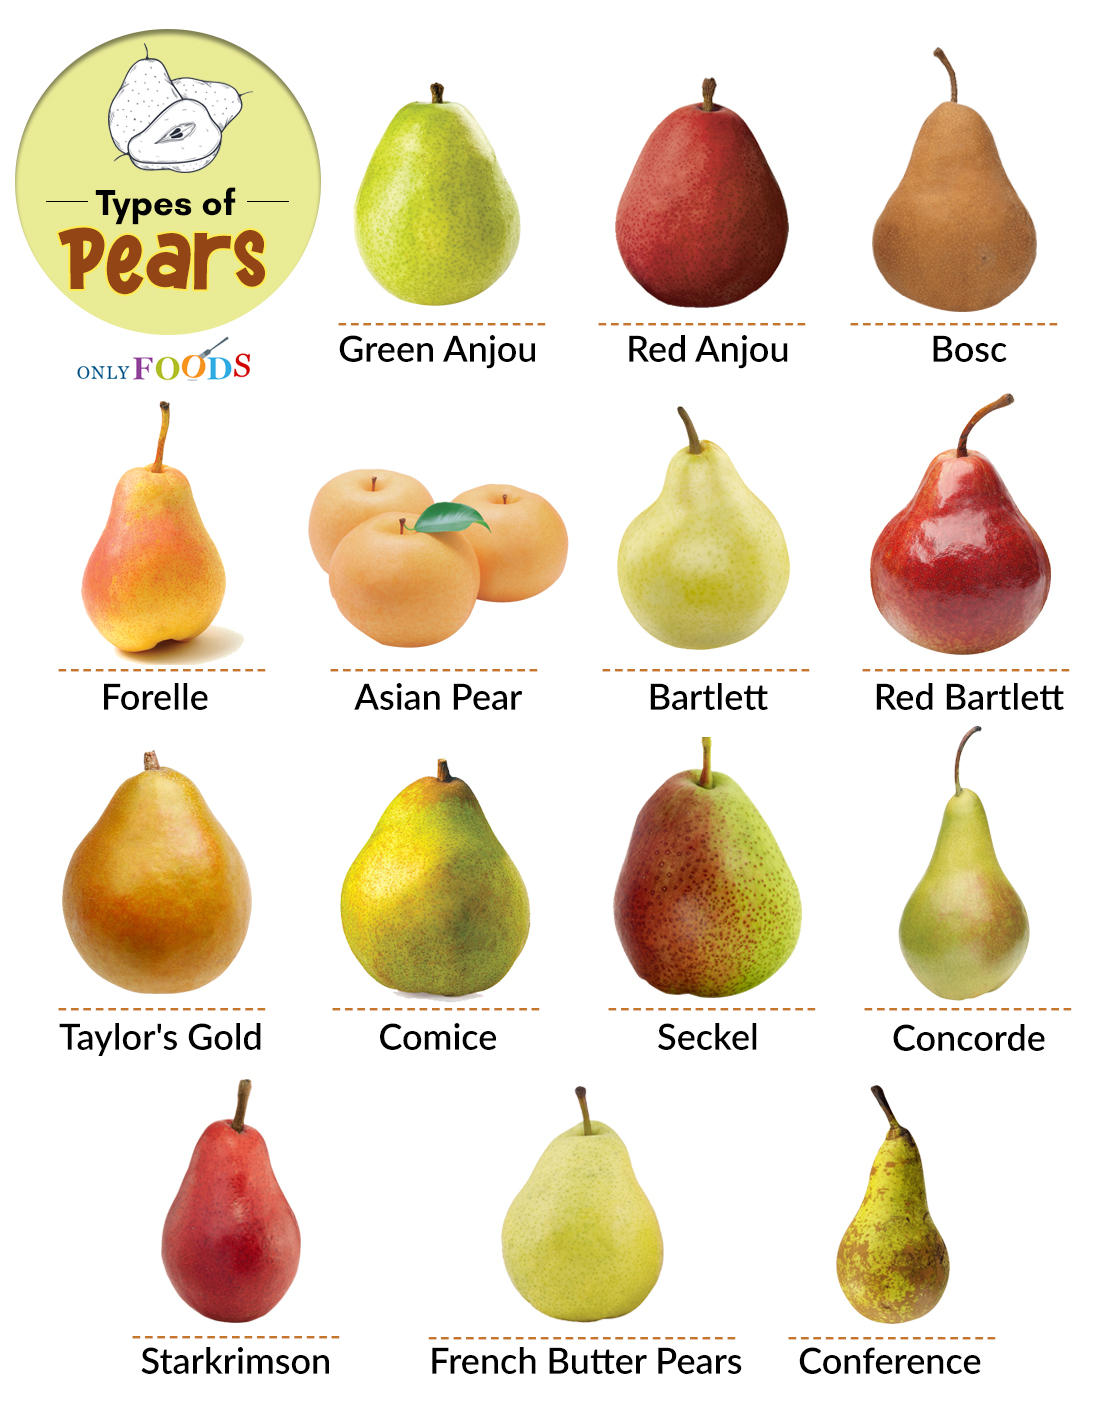 https://www.onlyfoods.net/wp-content/uploads/2020/08/Types-of-Pears.jpg